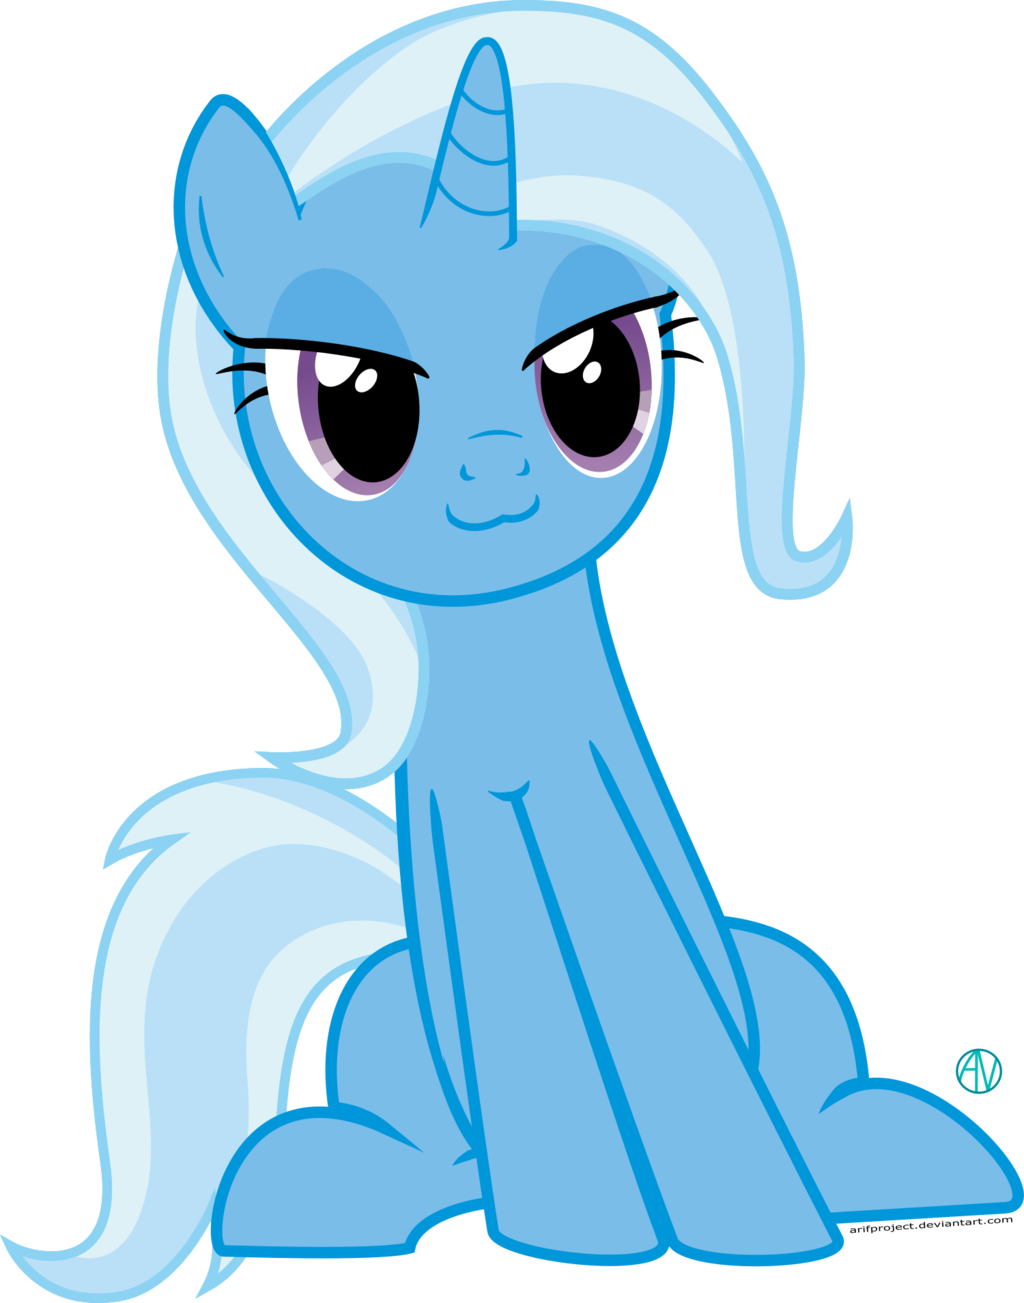 Trixie cat face vector by arifproject on DeviantArt